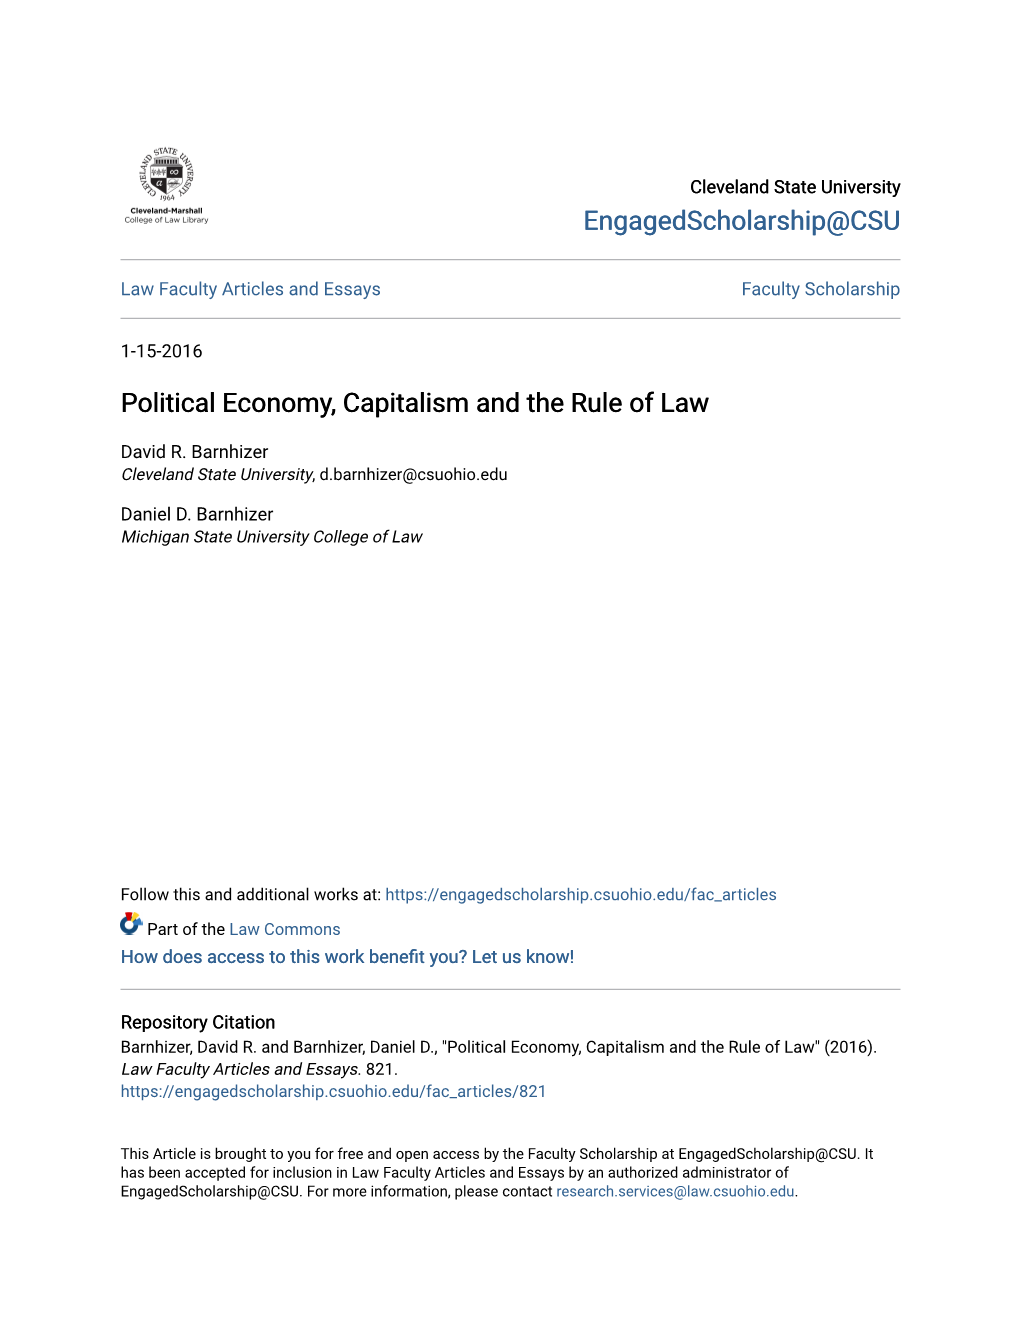 Political Economy, Capitalism and the Rule of Law